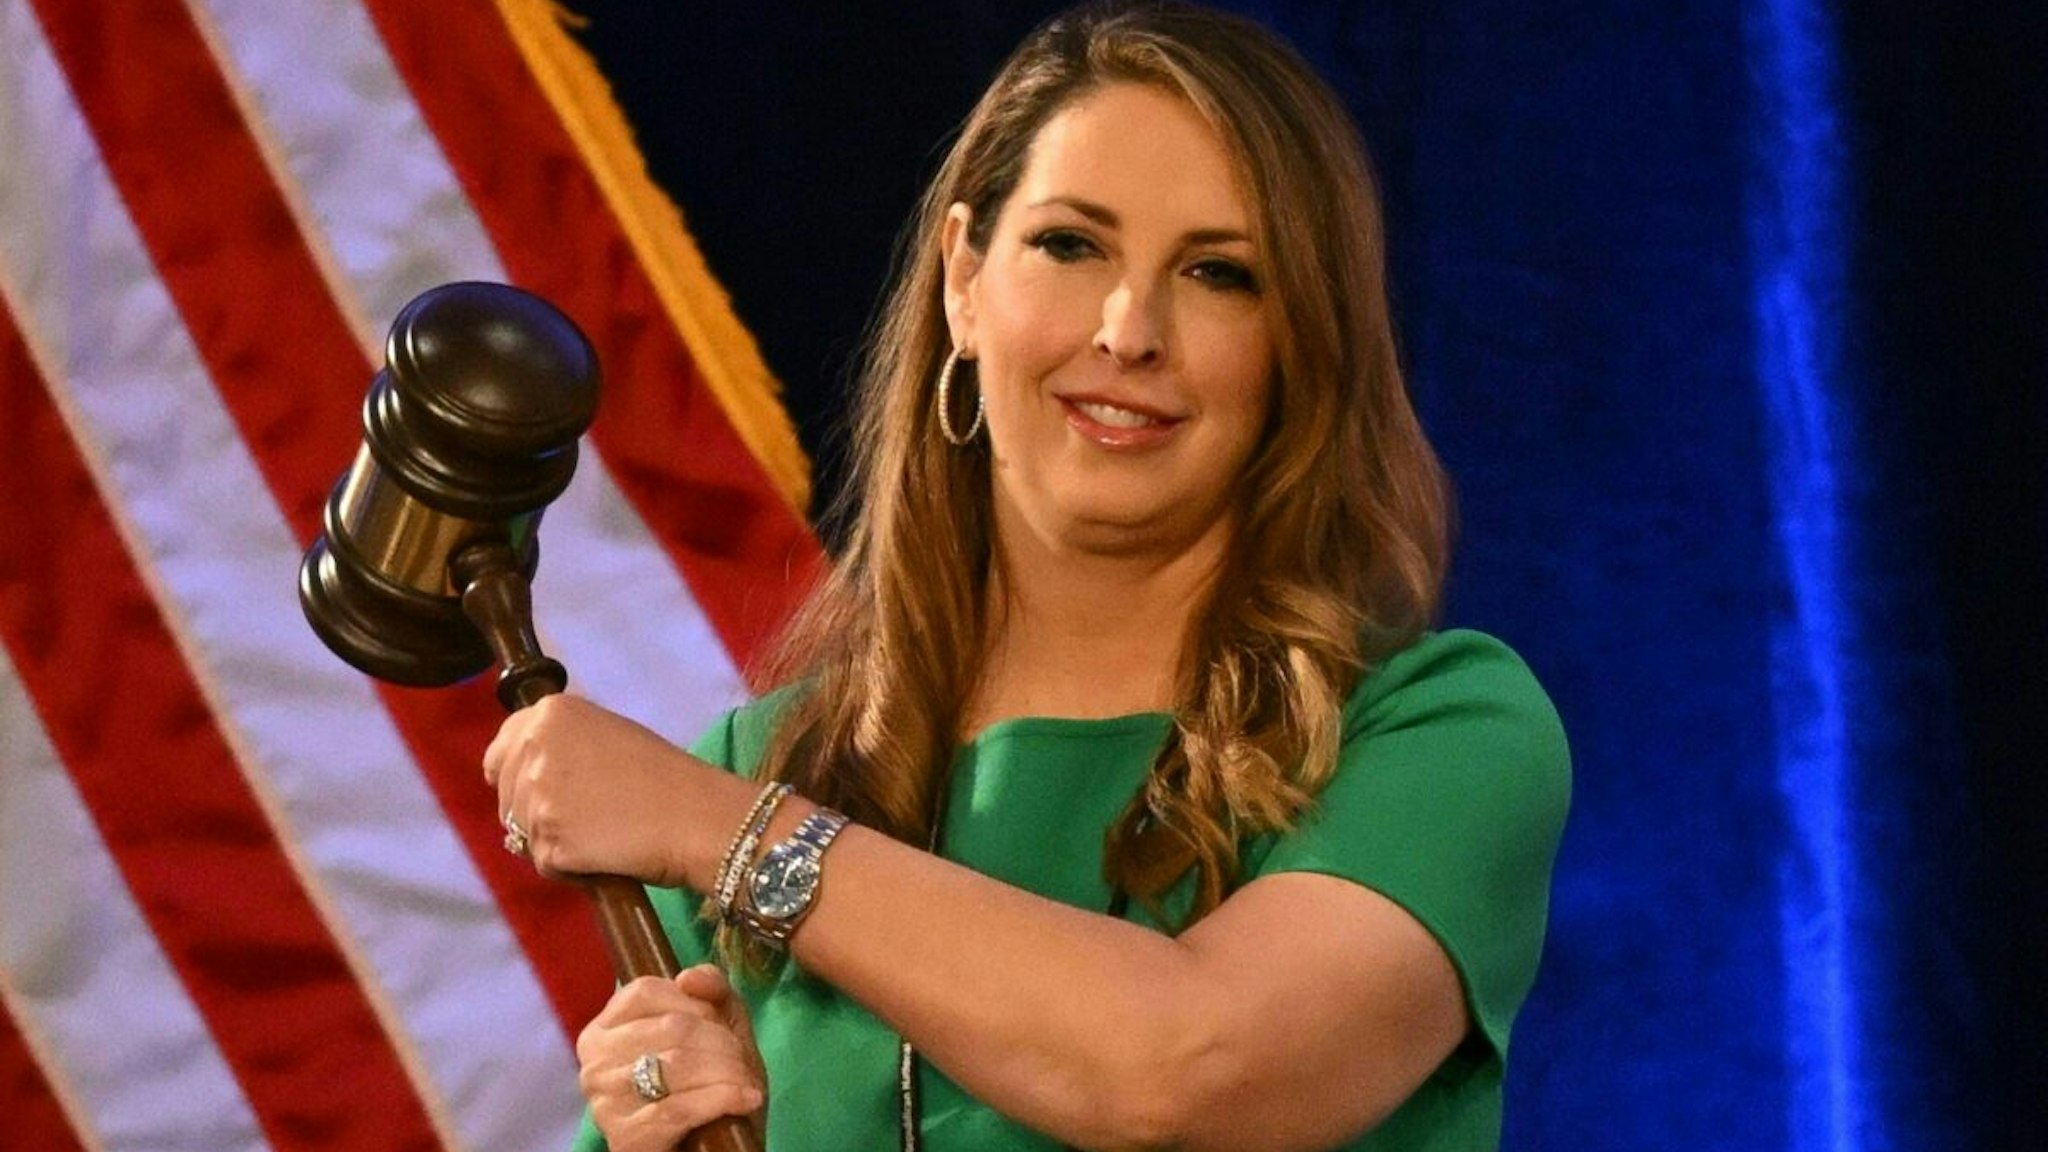 Ronna McDaniel, Chairwoman of the Republican National Committee (RNC) holds the gavel at the start of the 2023 Republican National Committee Winter Meeting in Dana Point, California, on January 27, 2023.